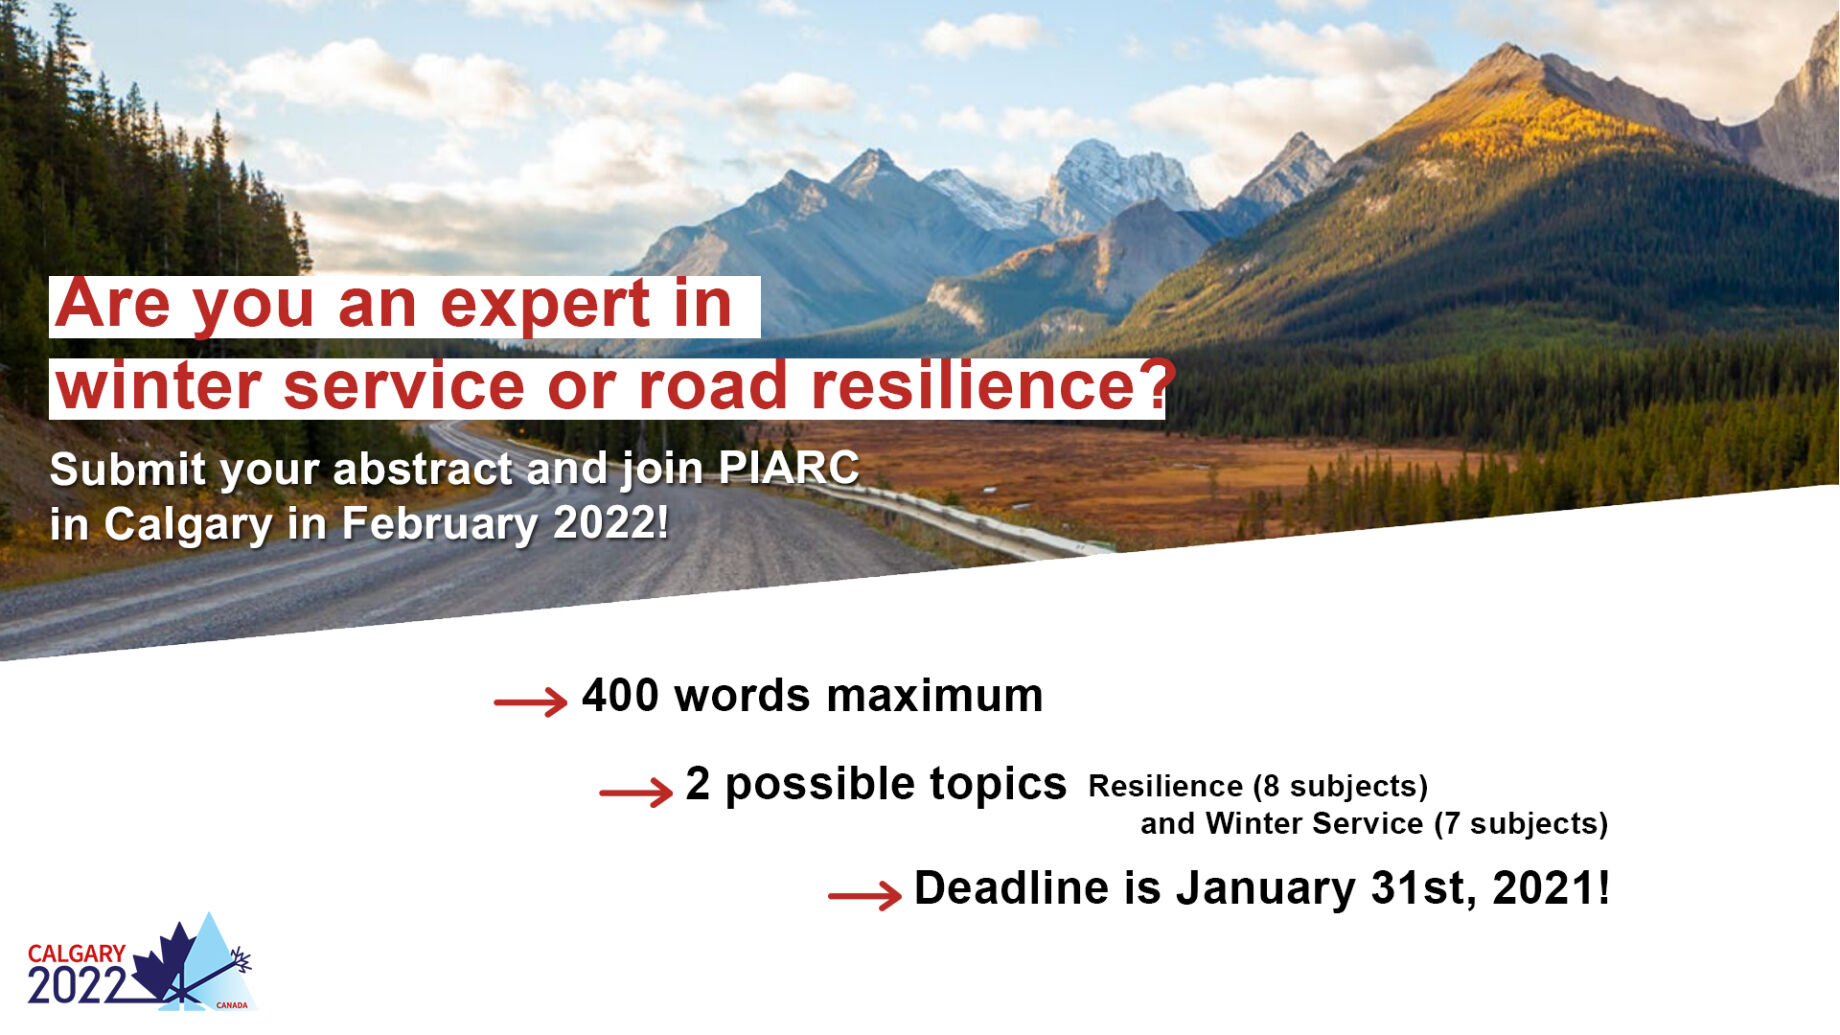 Are you an expert in winter service or road resilience? Share your
professional achievements by submitting a 400-word abstract by January
31, 2021!